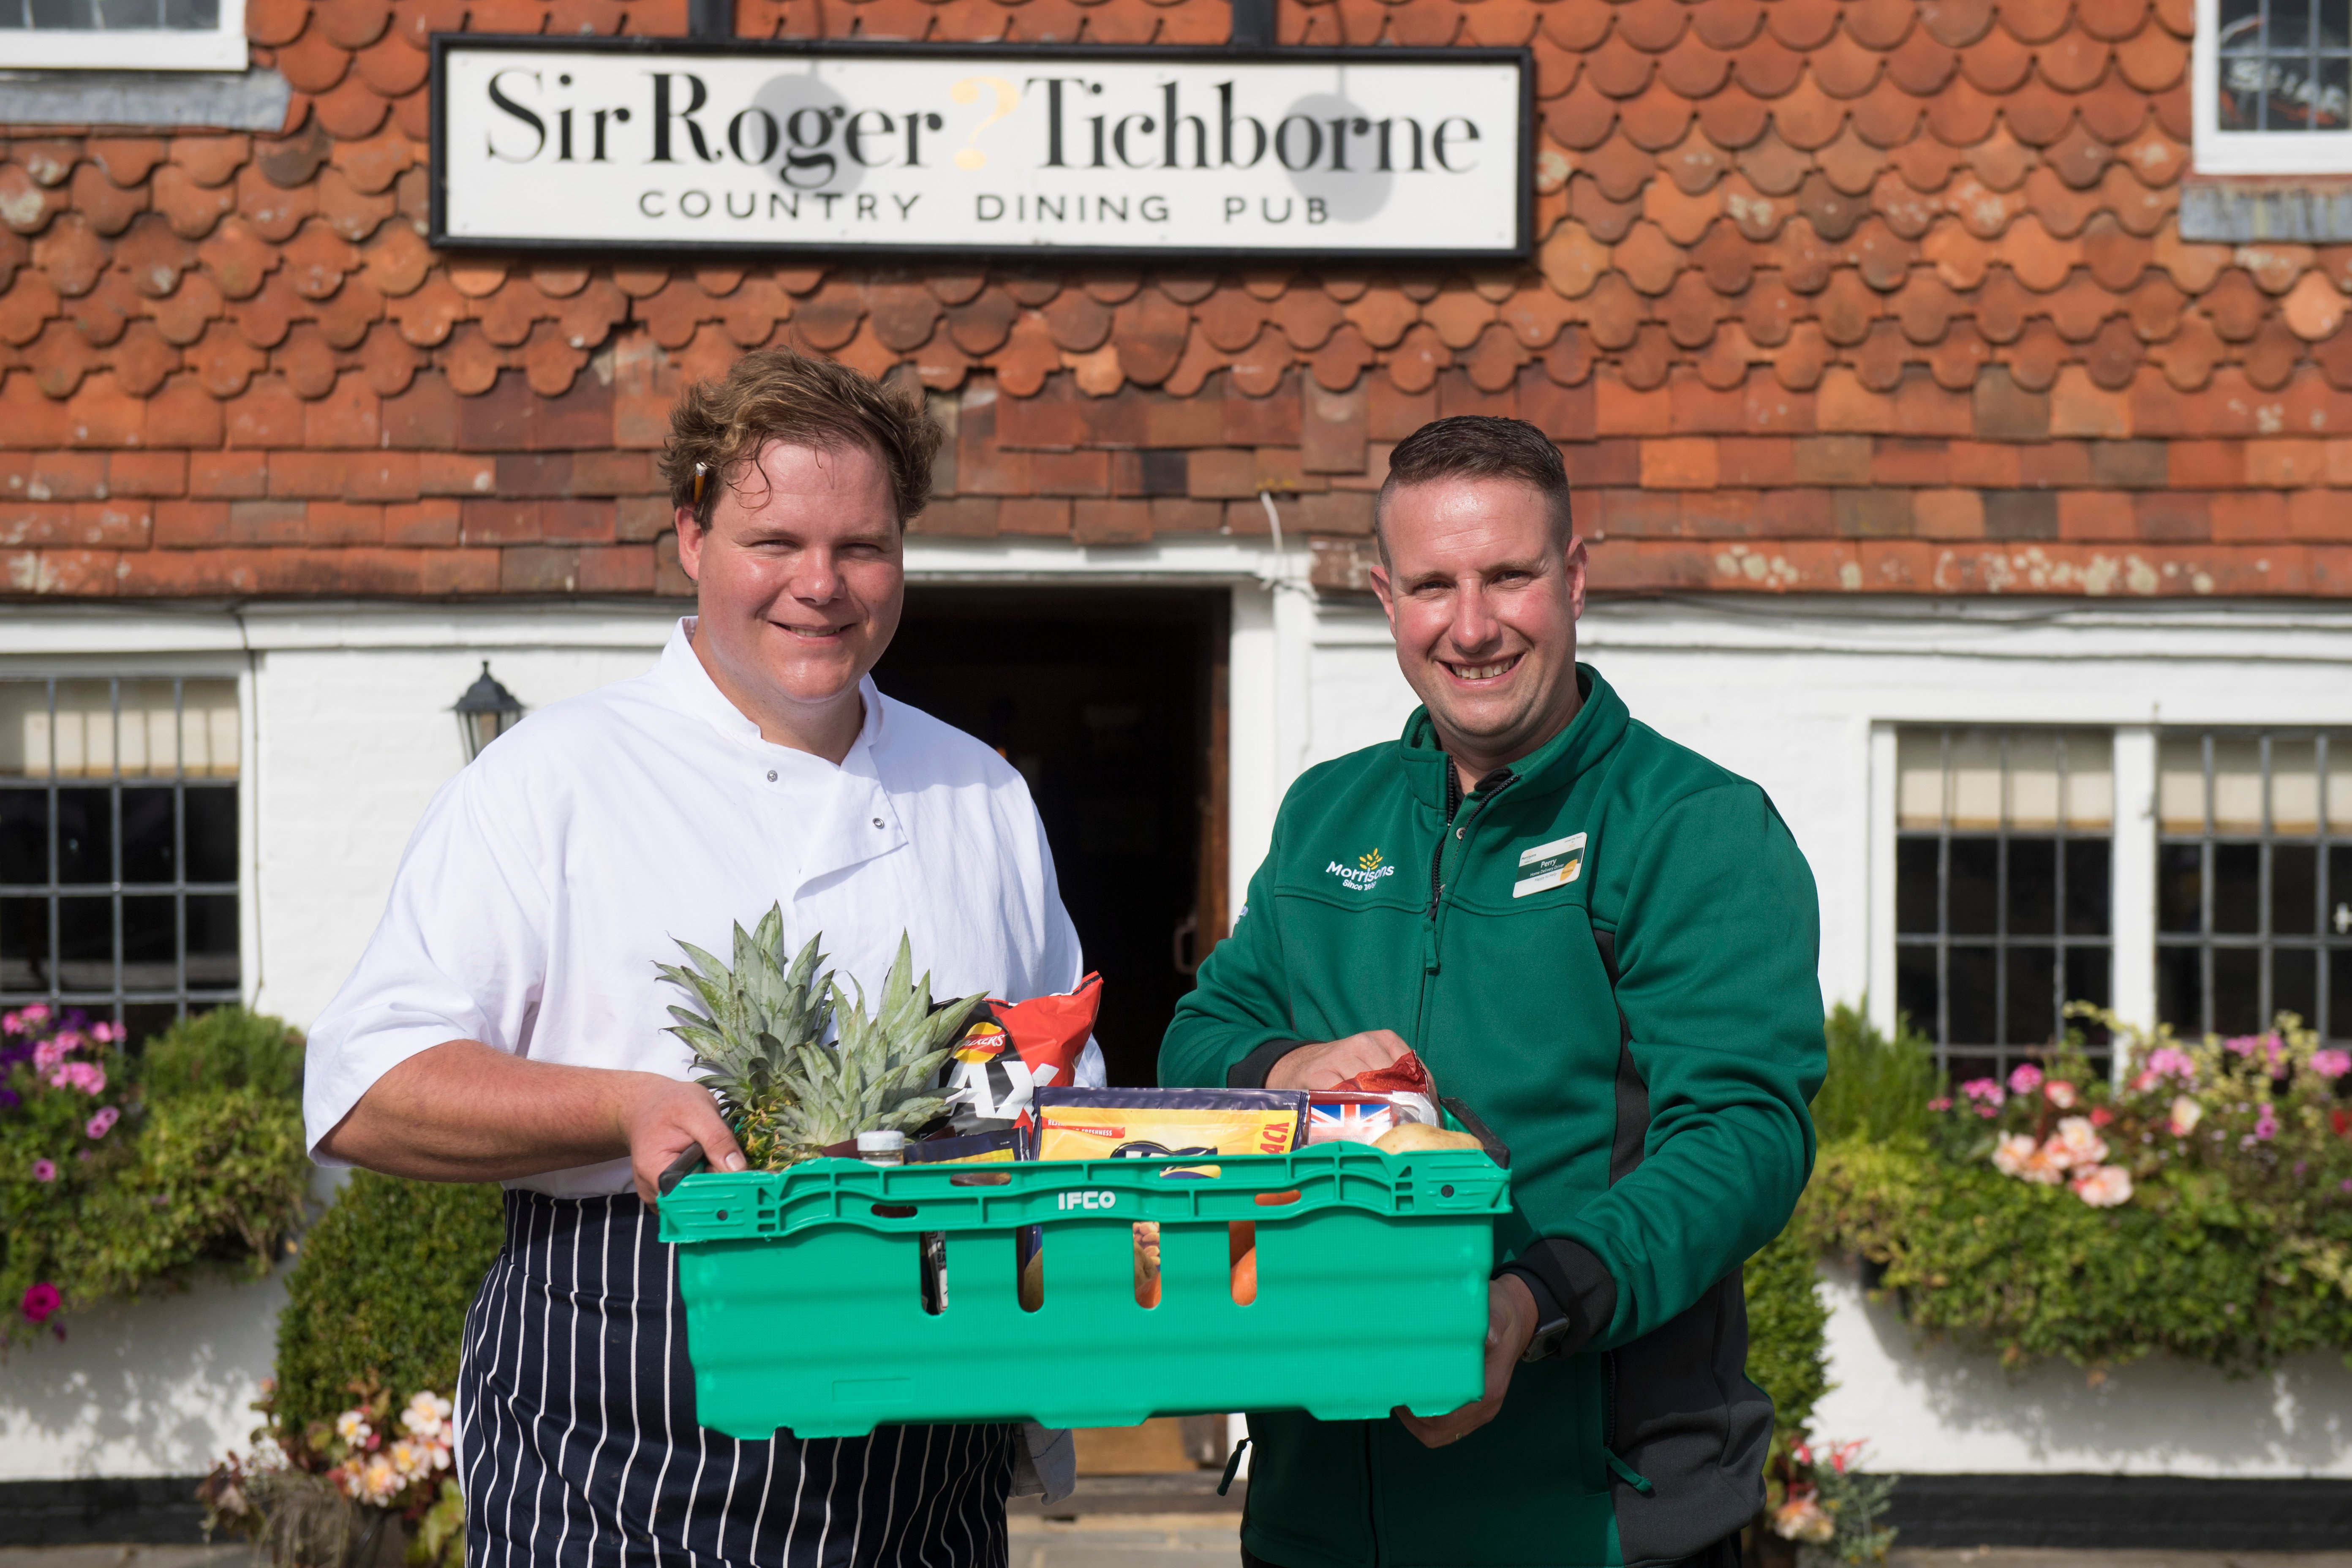 StarStock partners with Morrisons to deliver food directly to pubs, restaurants and hotels